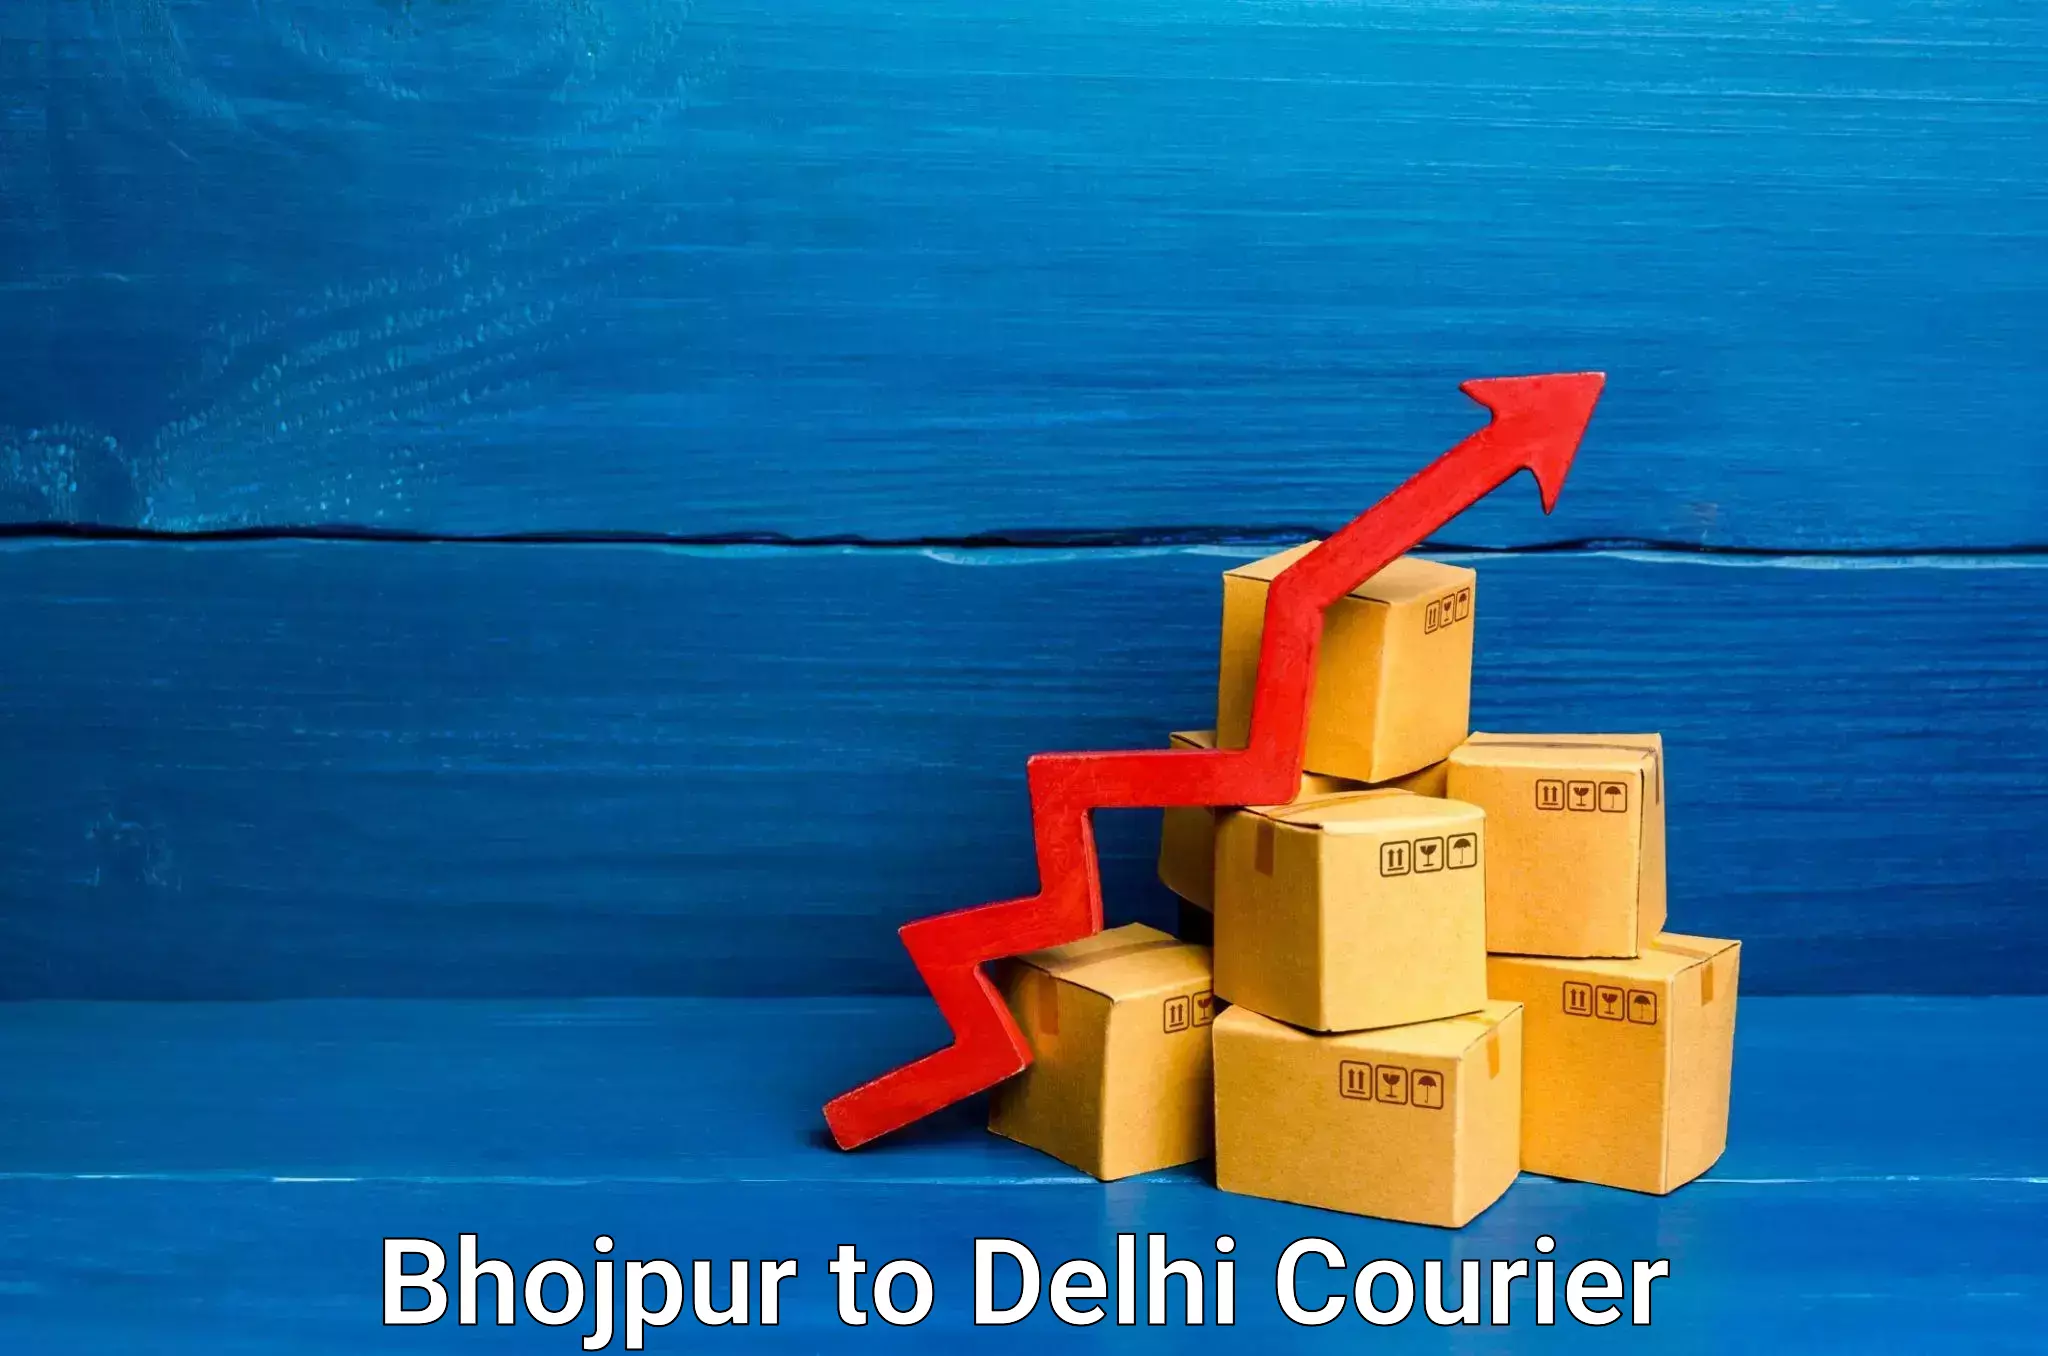 Budget-friendly movers Bhojpur to NCR